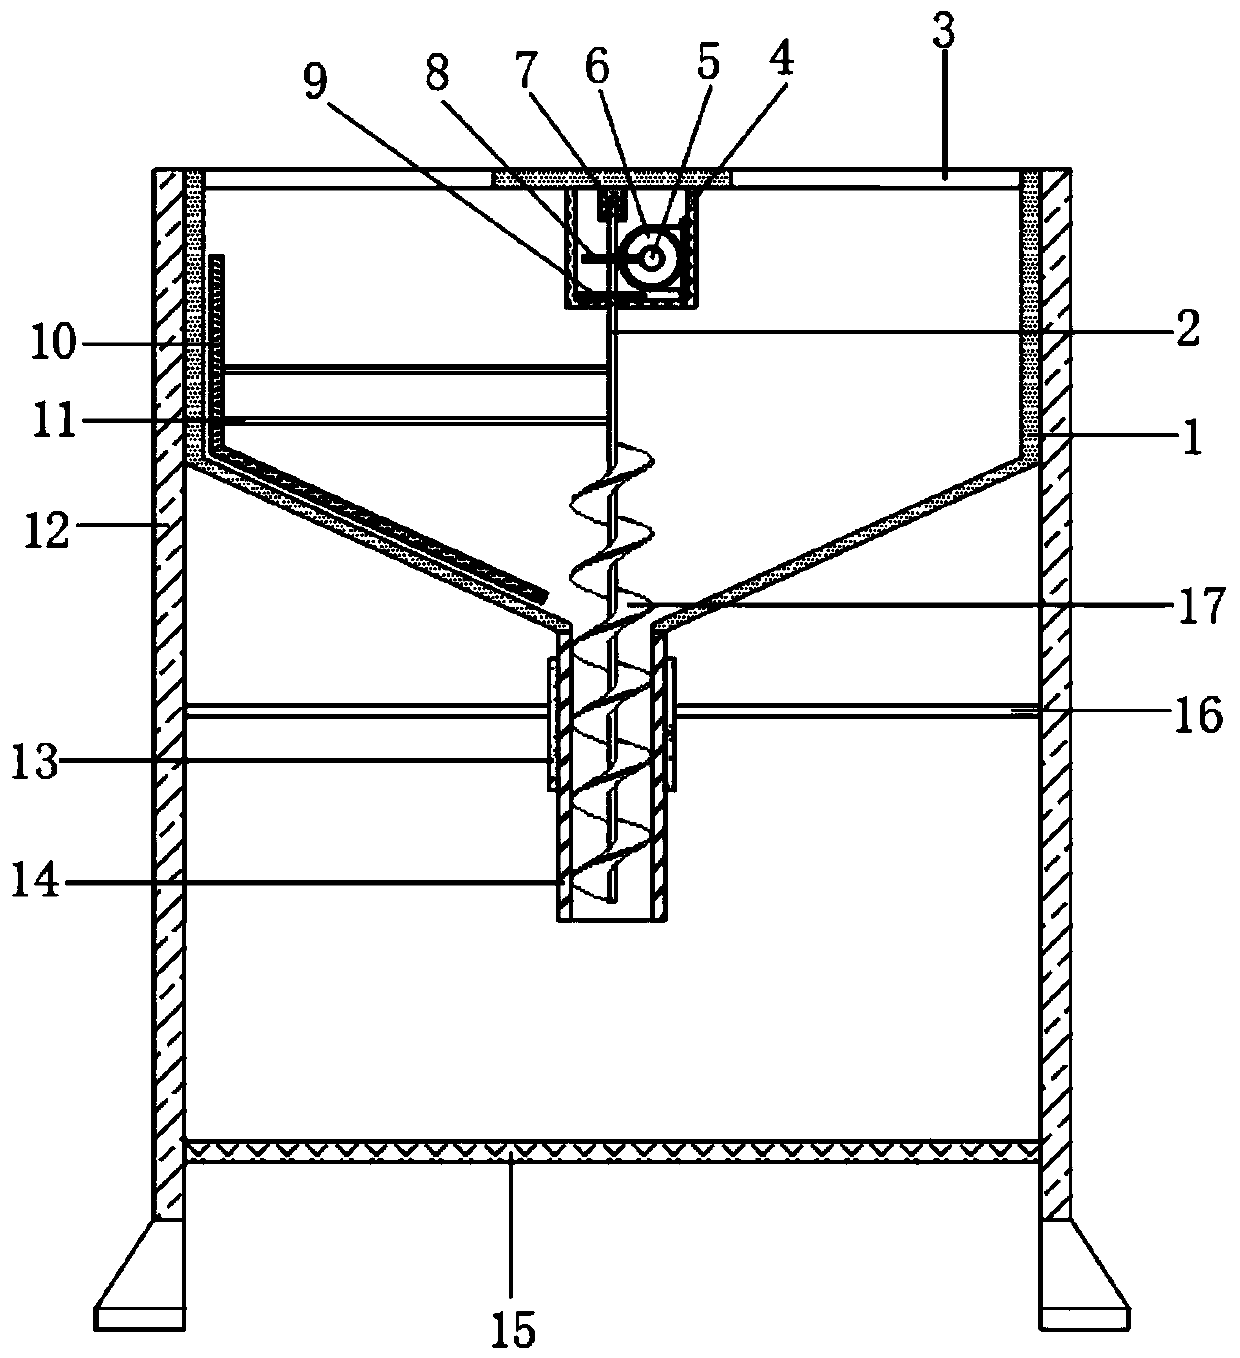 Discharging device with rice processing and weighing effects